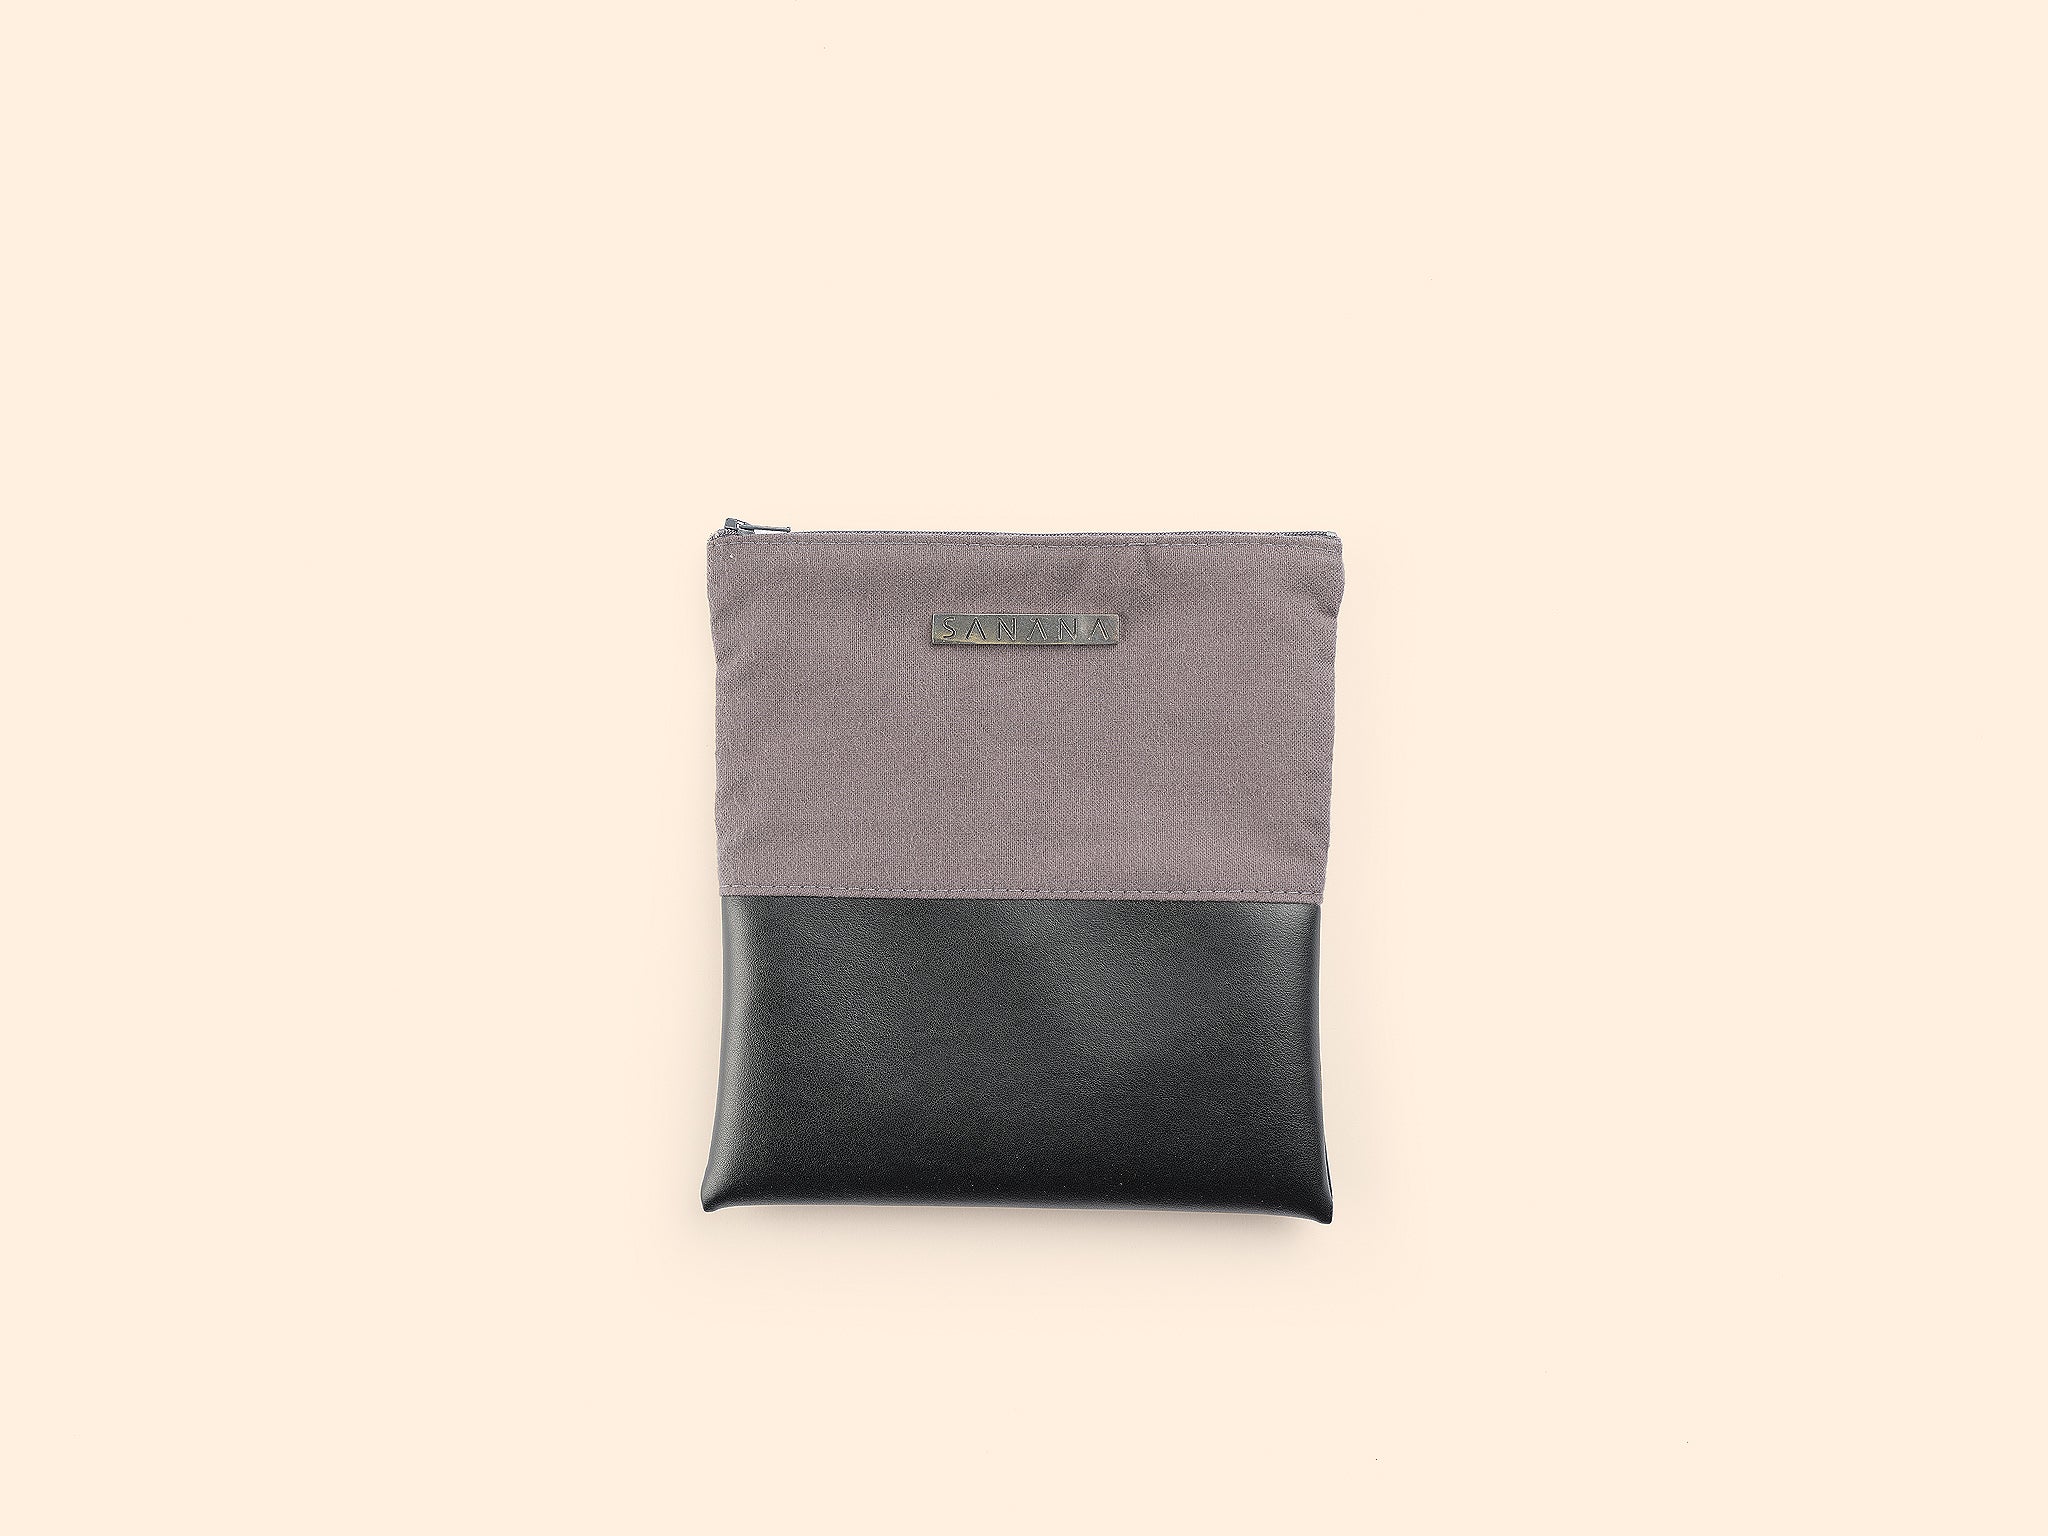 Astuccio - Cosmetic pouch - Several colors available